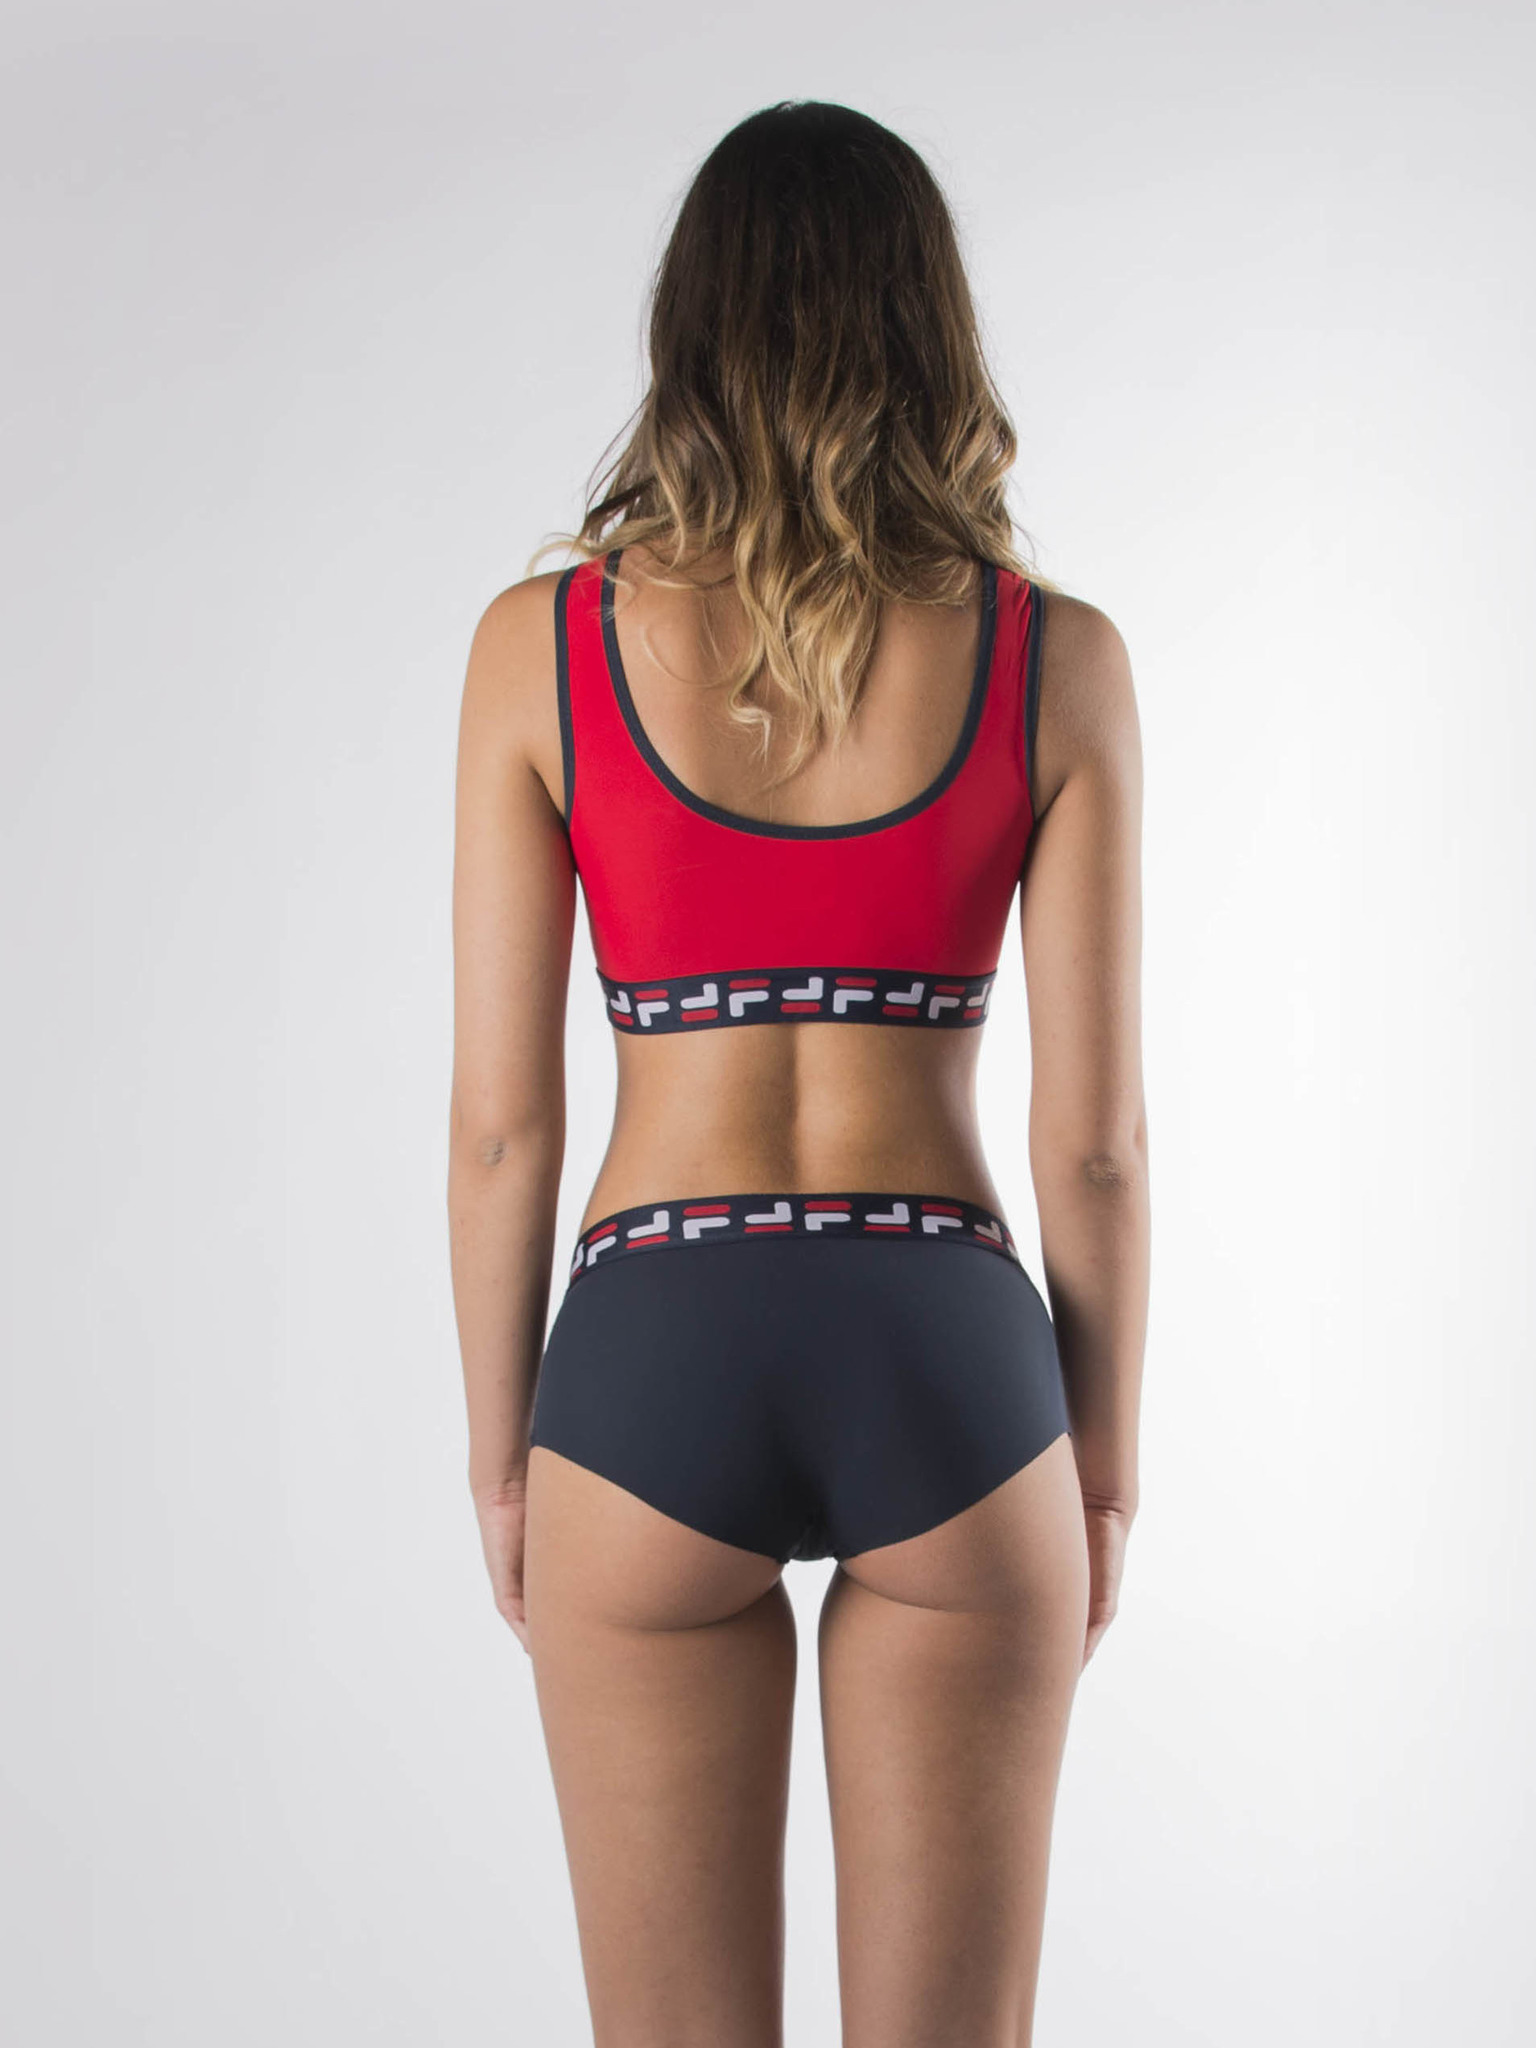 Fila South Africa - Your body loves it #allofme FILA underwear 💥 Mia Bra  R299,95 Tia Thong R159,95 Available online